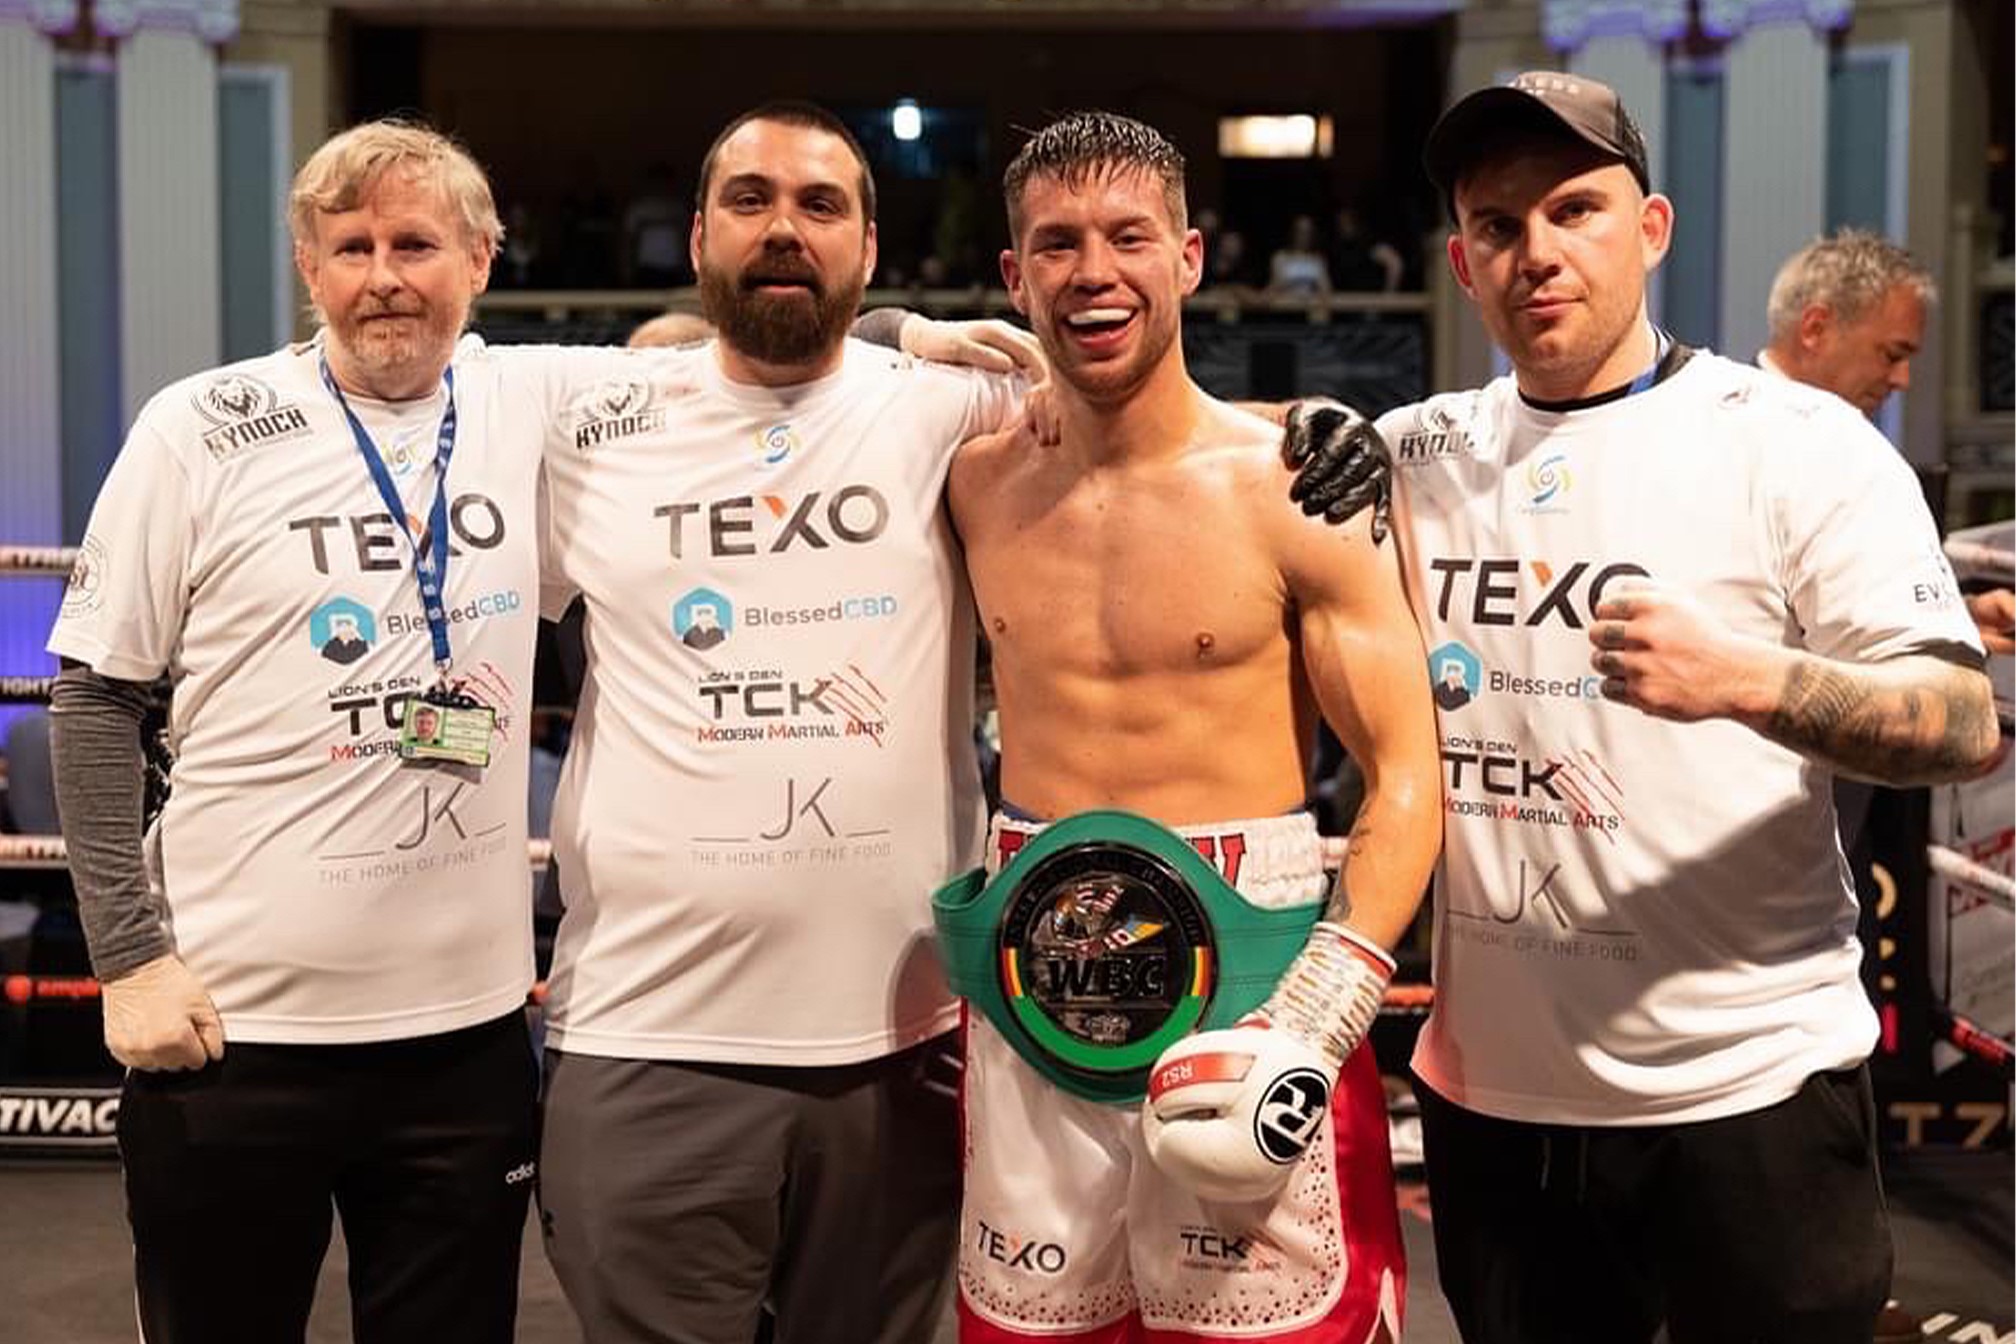 TEXO SUPPORT ALLOWS ABERDEEN BOXER TO REALISE PROFESSIONAL DREAM